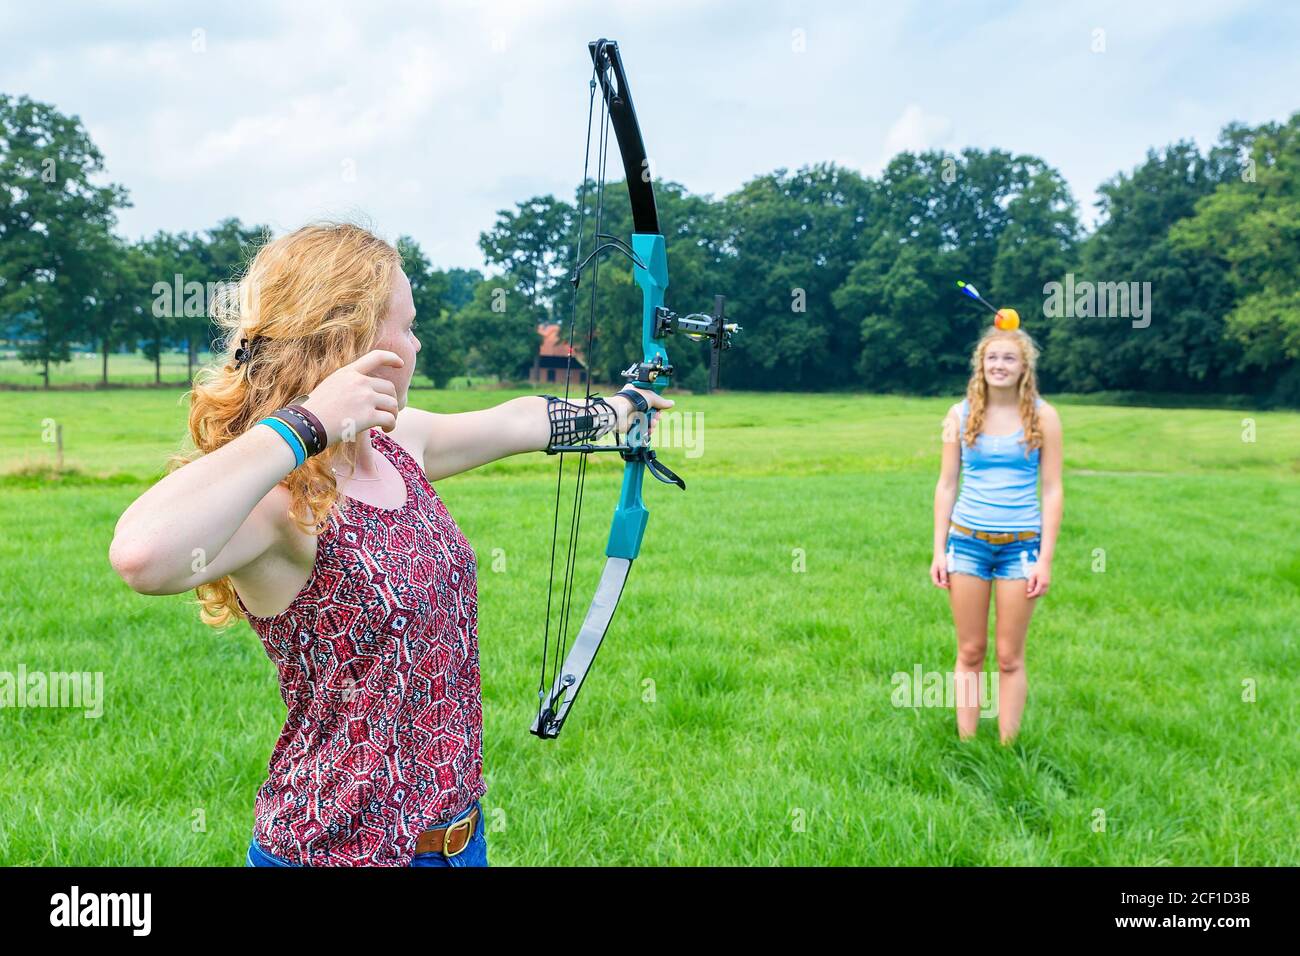 Dutch teenage girl aiming arrow of compound bow at fruit on head of young woman Stock Photo